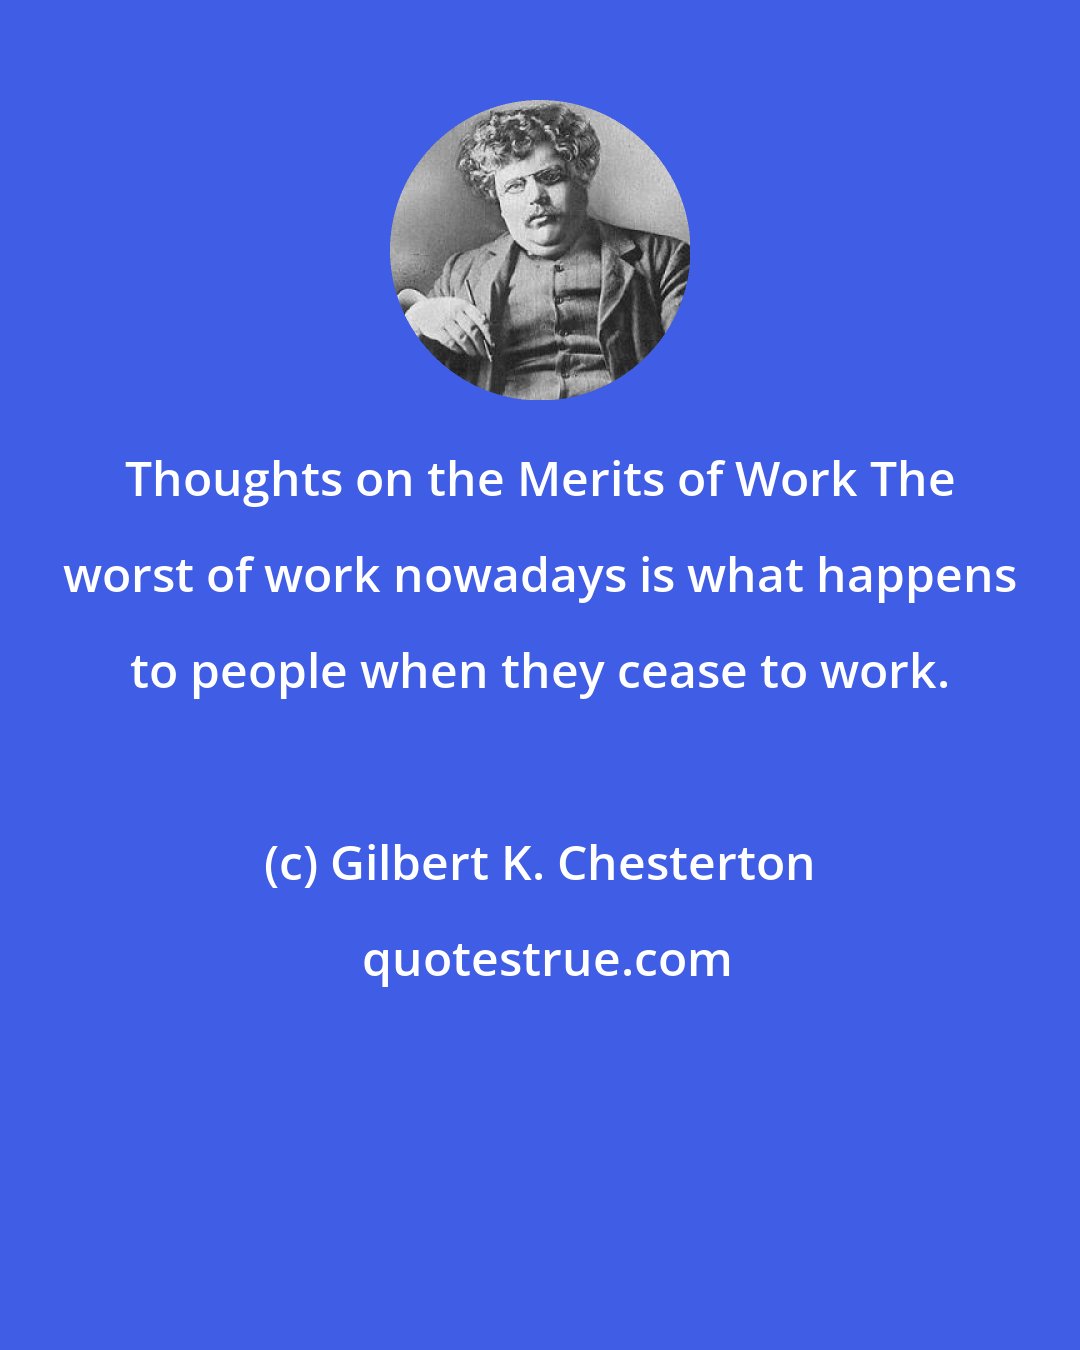 Gilbert K. Chesterton: Thoughts on the Merits of Work The worst of work nowadays is what happens to people when they cease to work.